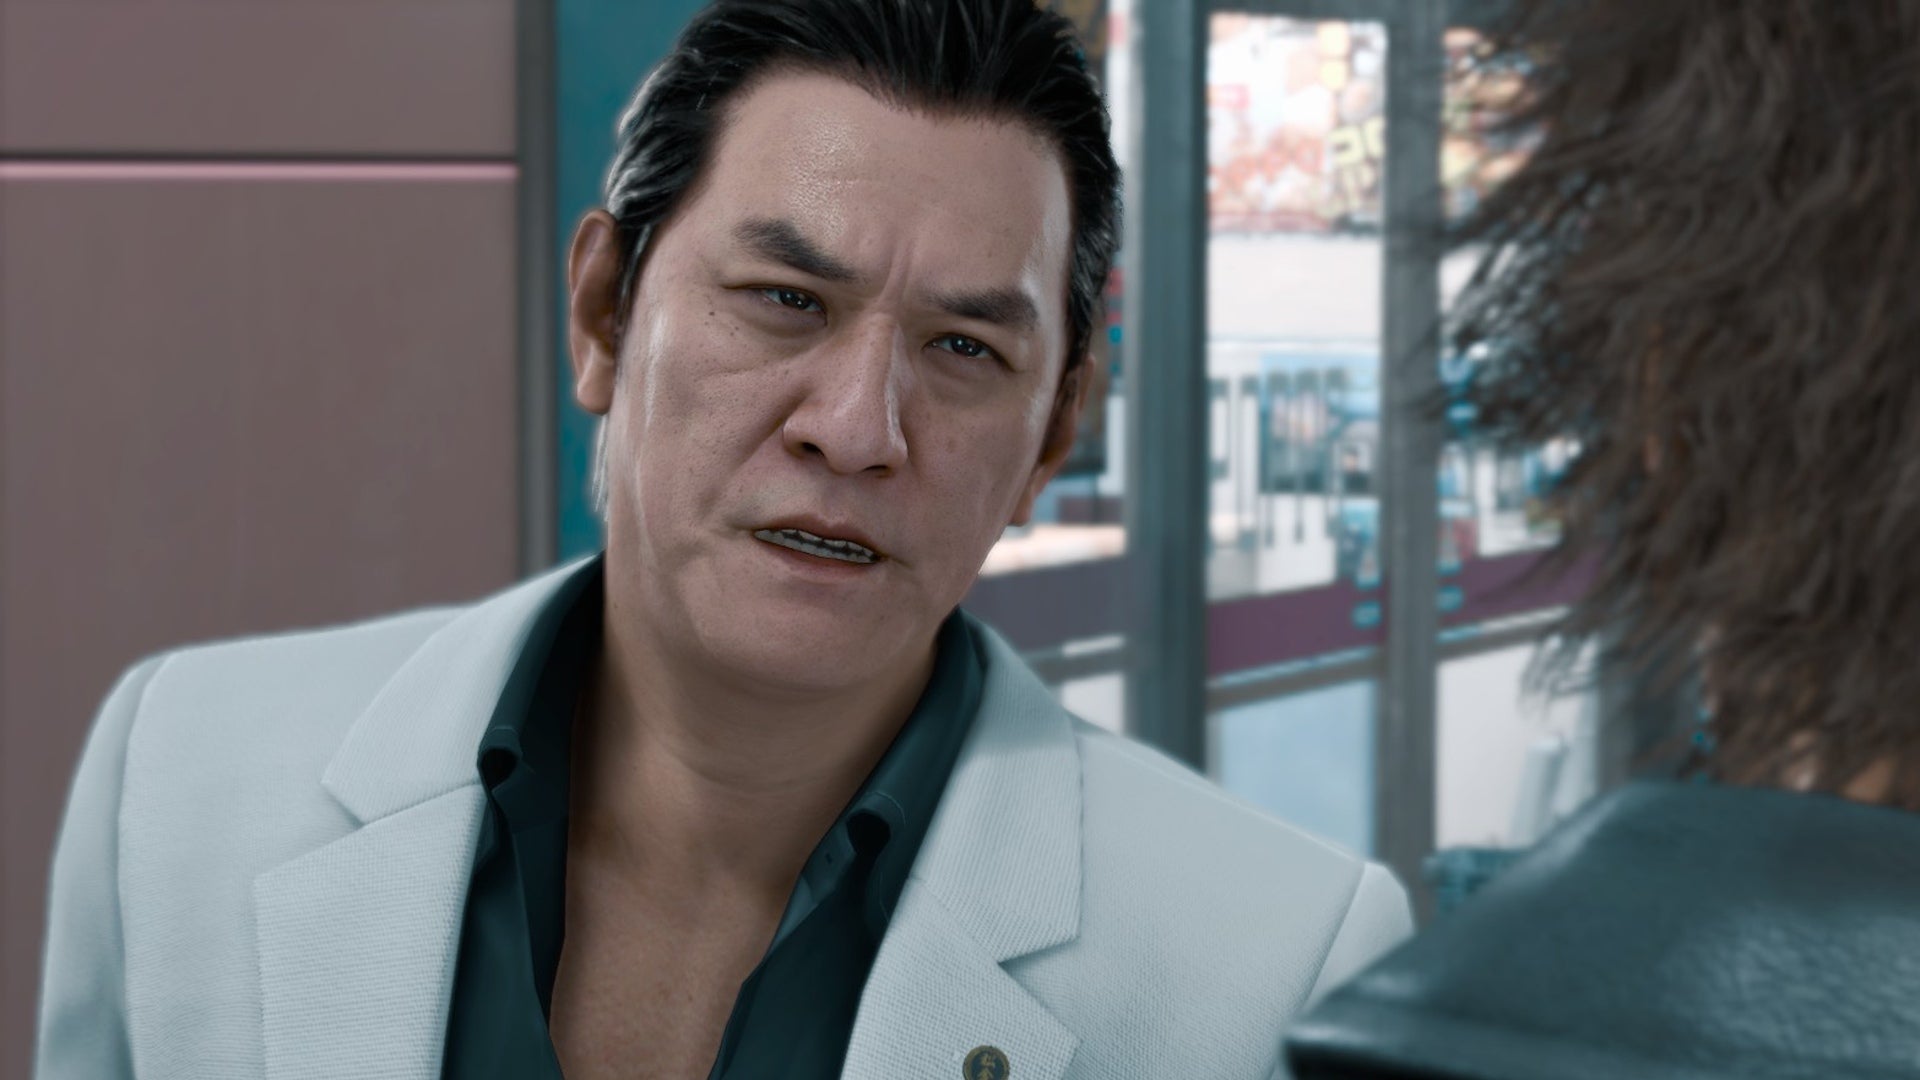 Judgment mod adds cut actor Pierre Taki back into the game